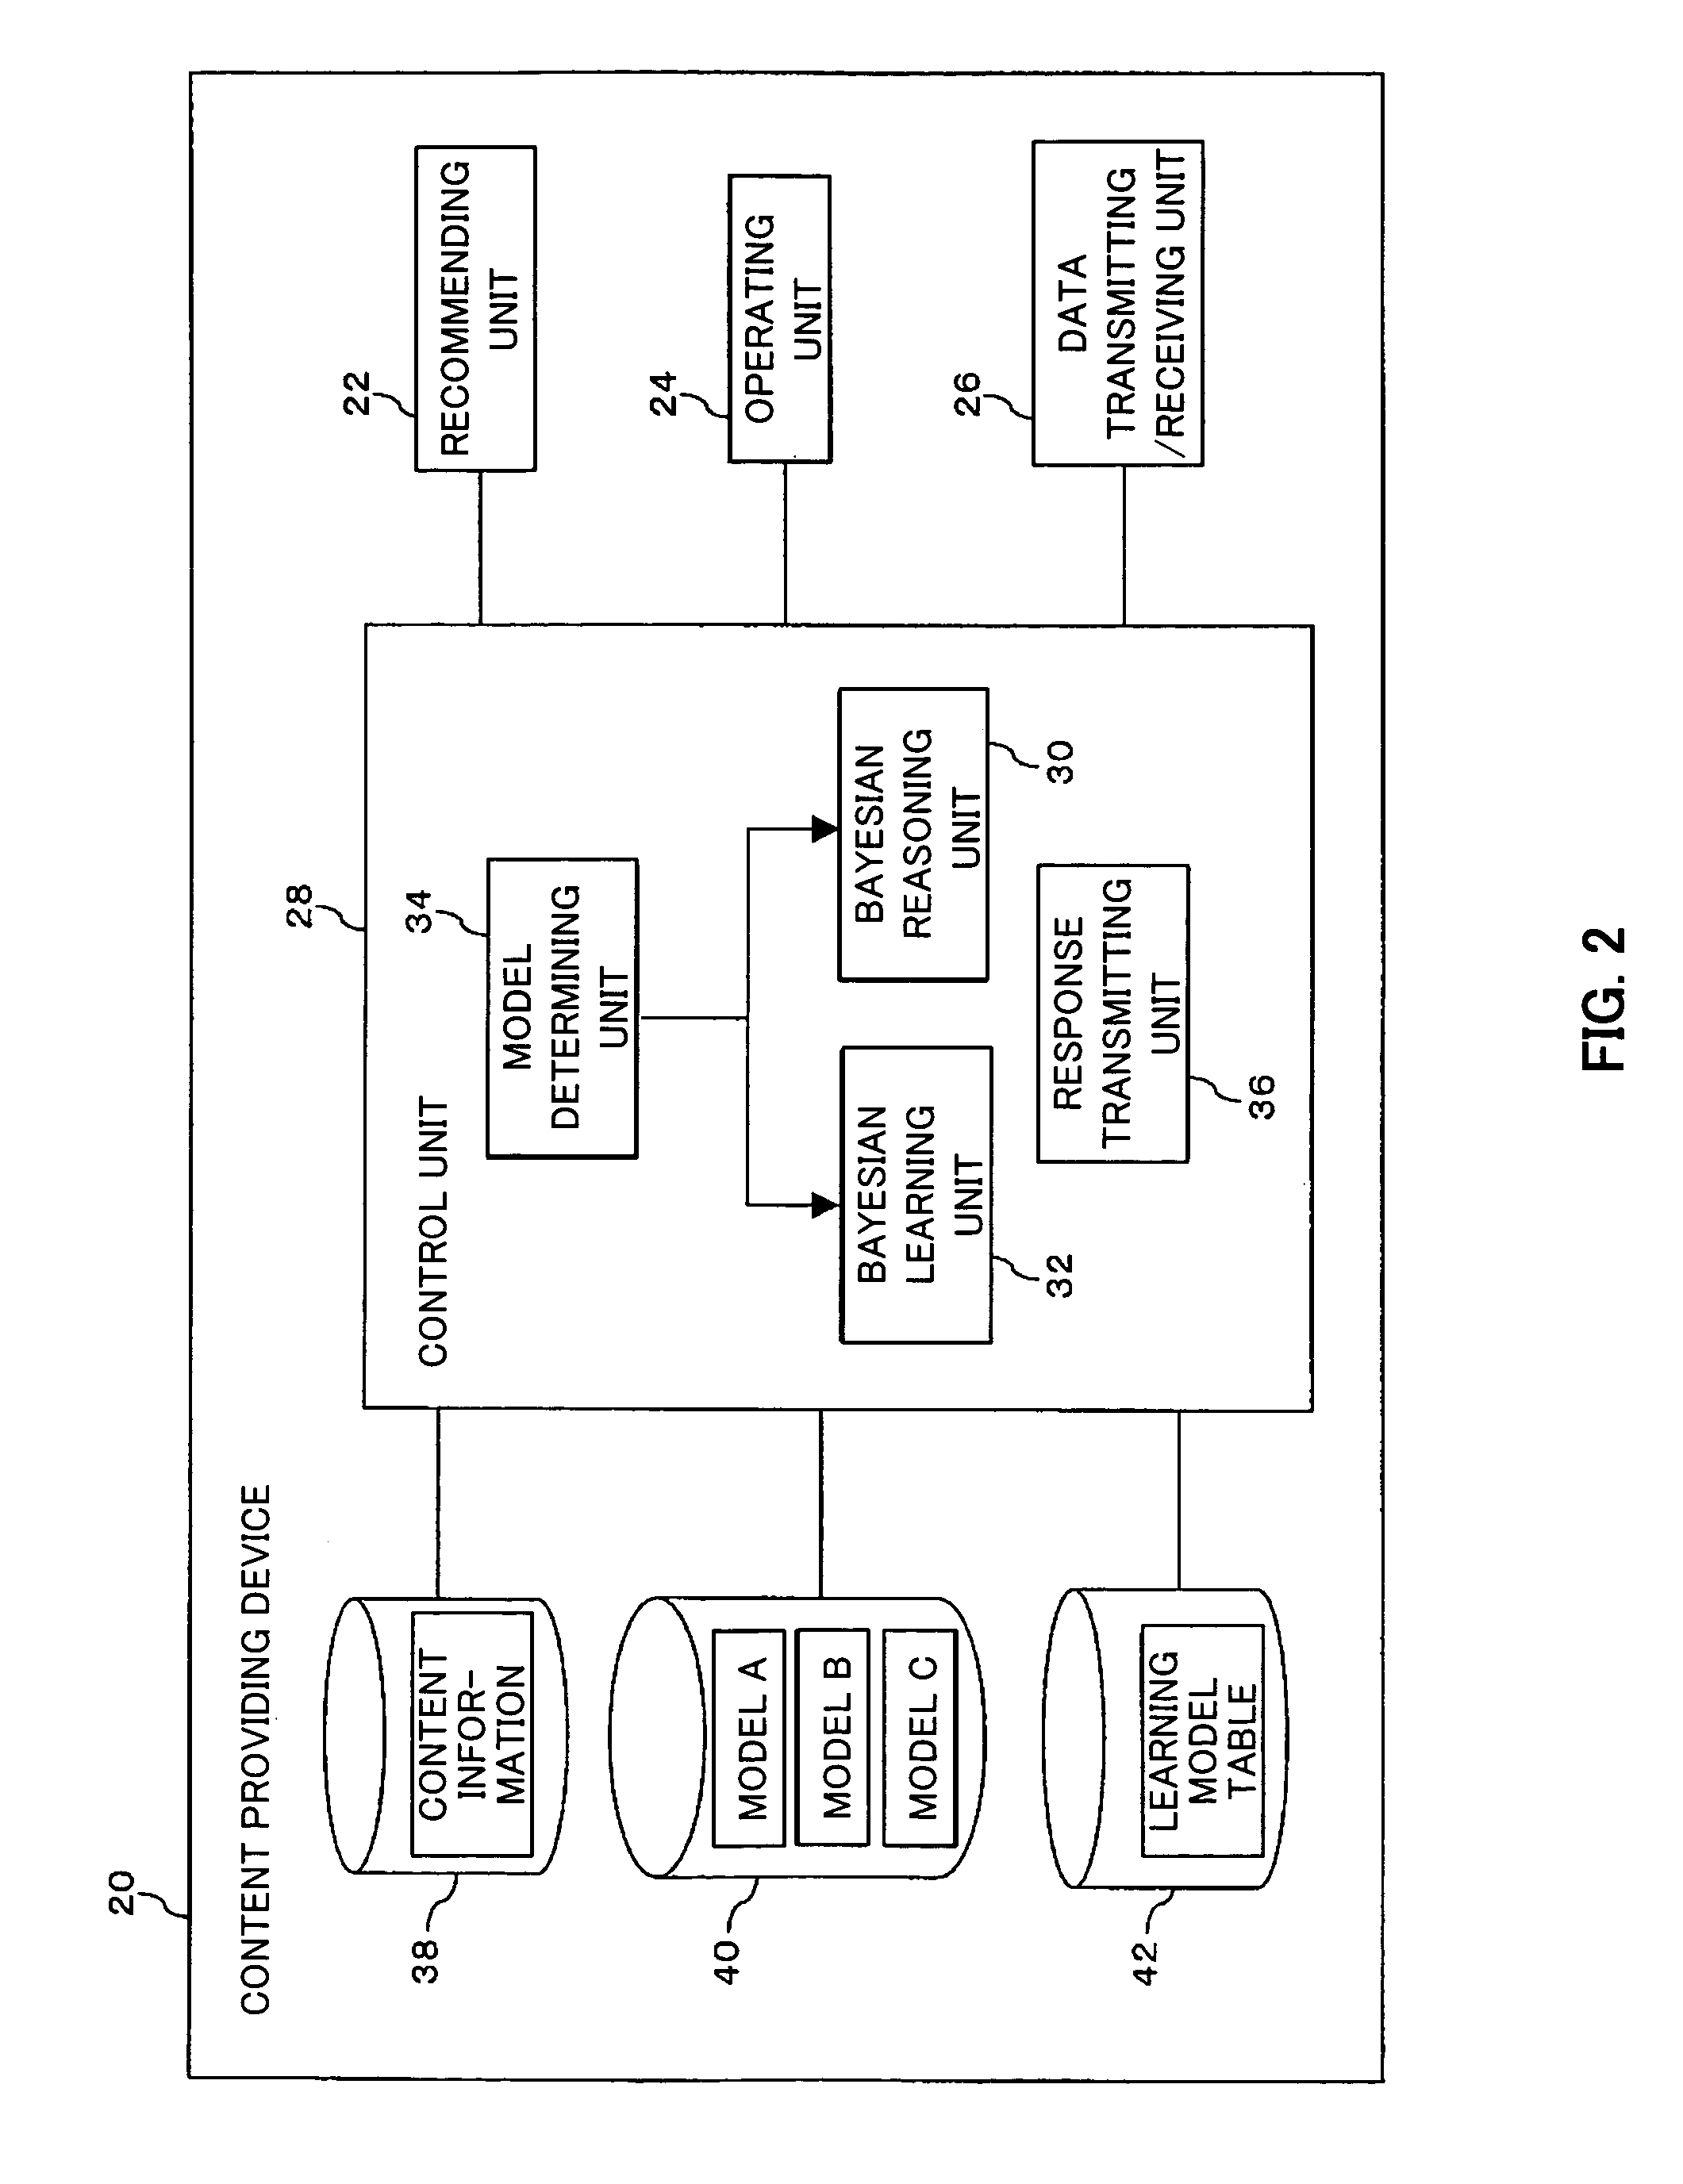 Vehicle information processing system for content recommendation using Bayesian network models